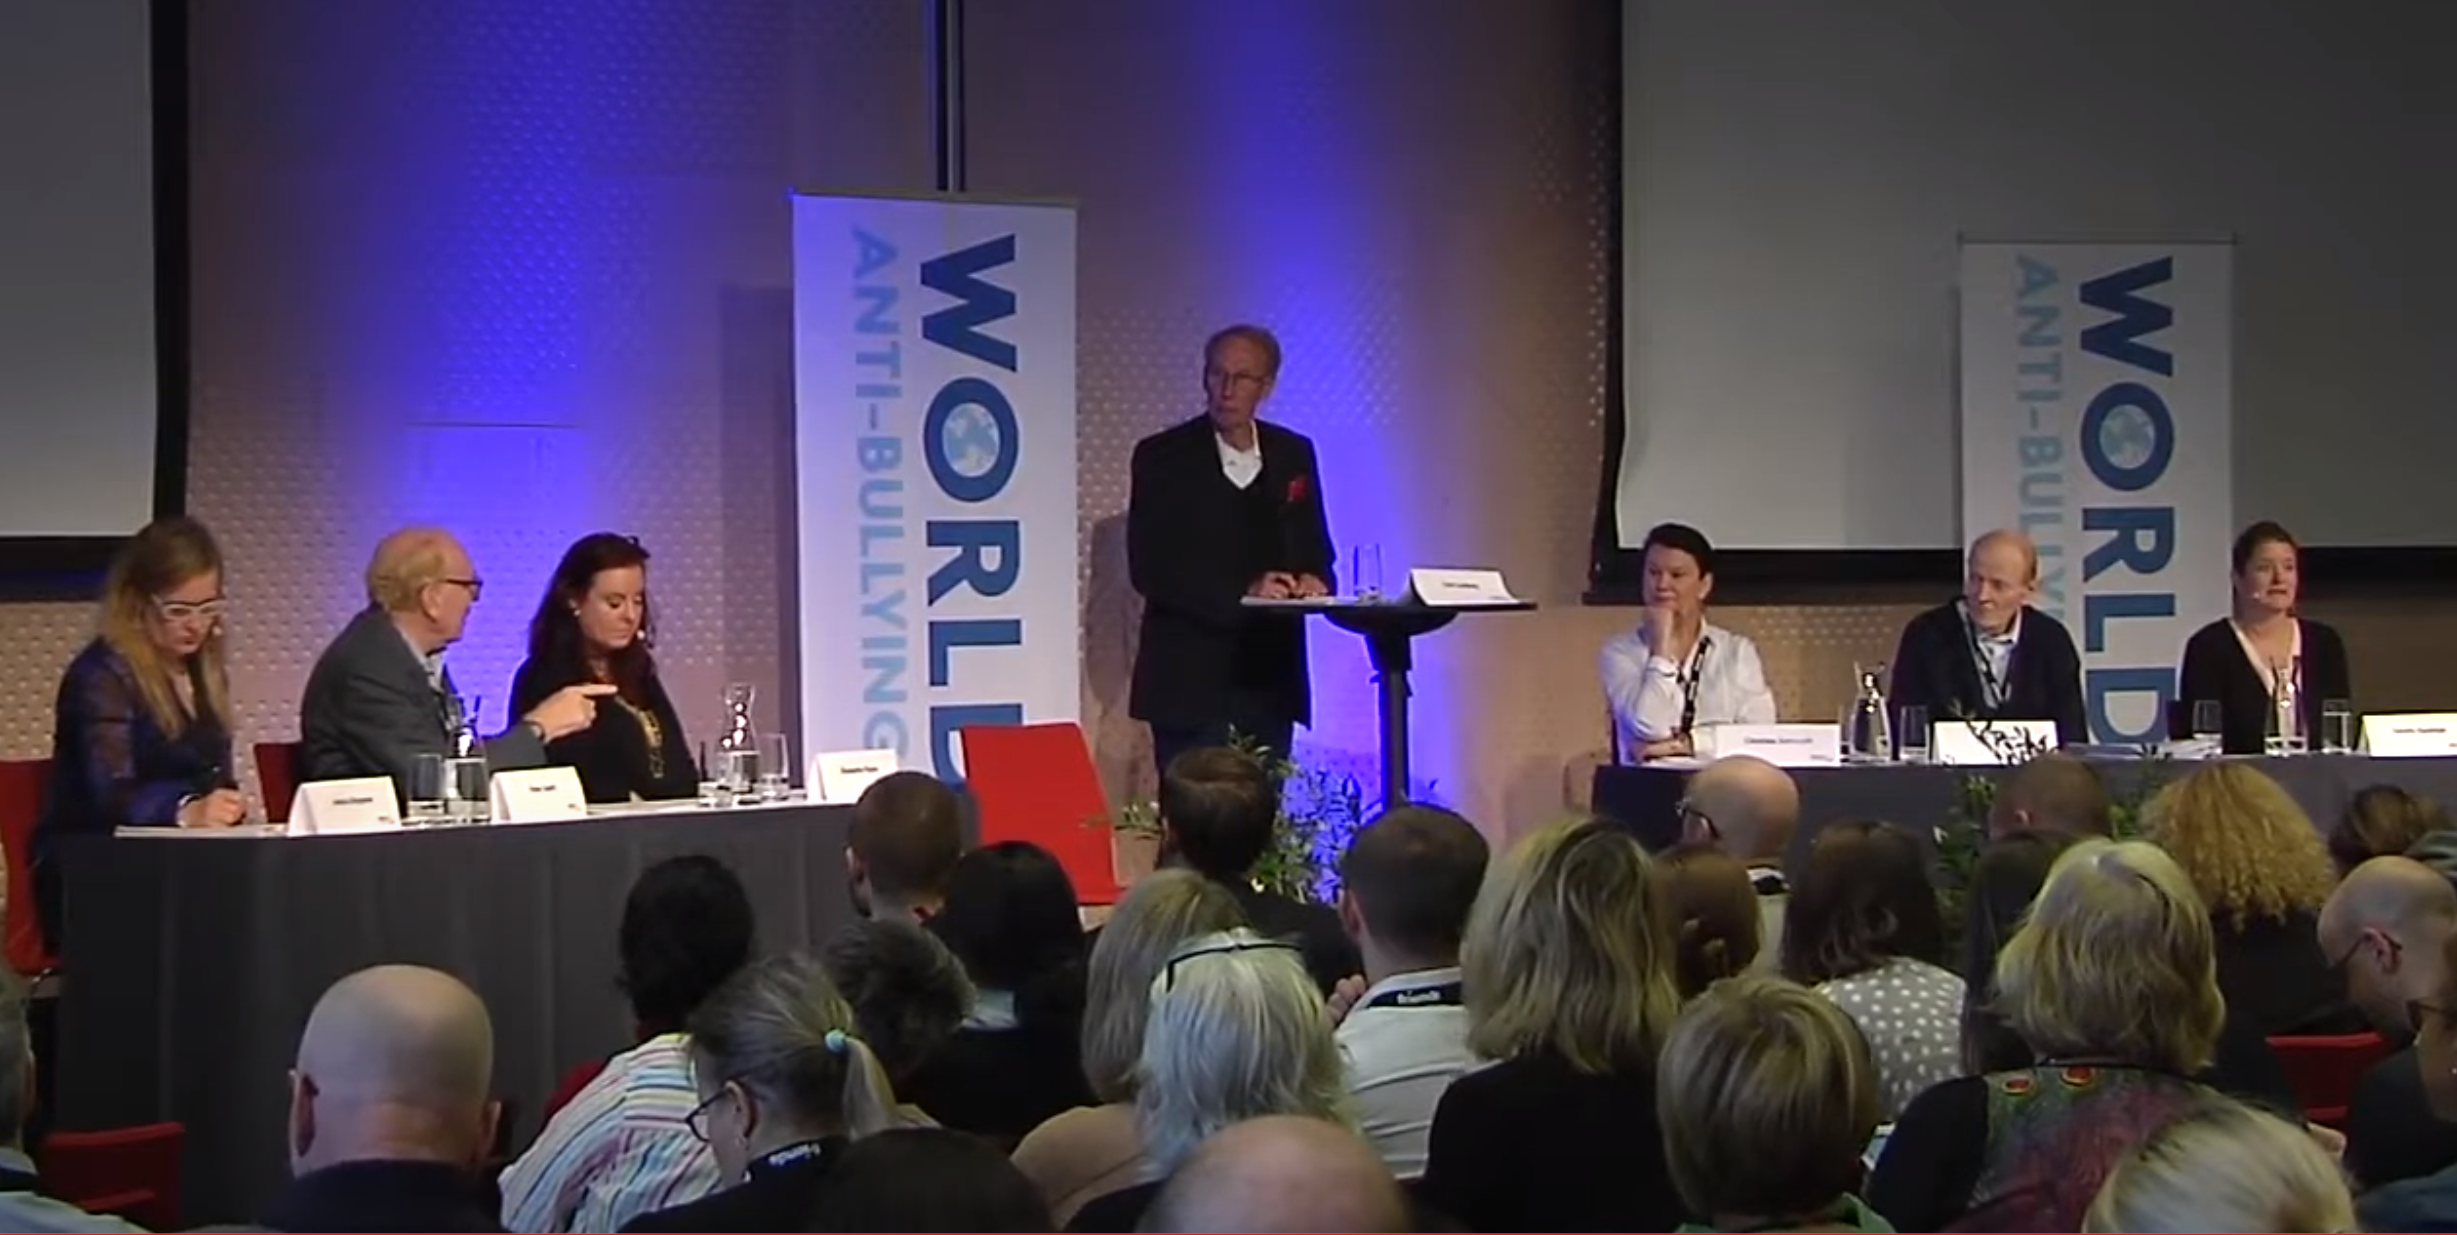 Panel Keynote Session at the World Anti-Bullying Forum in Stockholm 2017